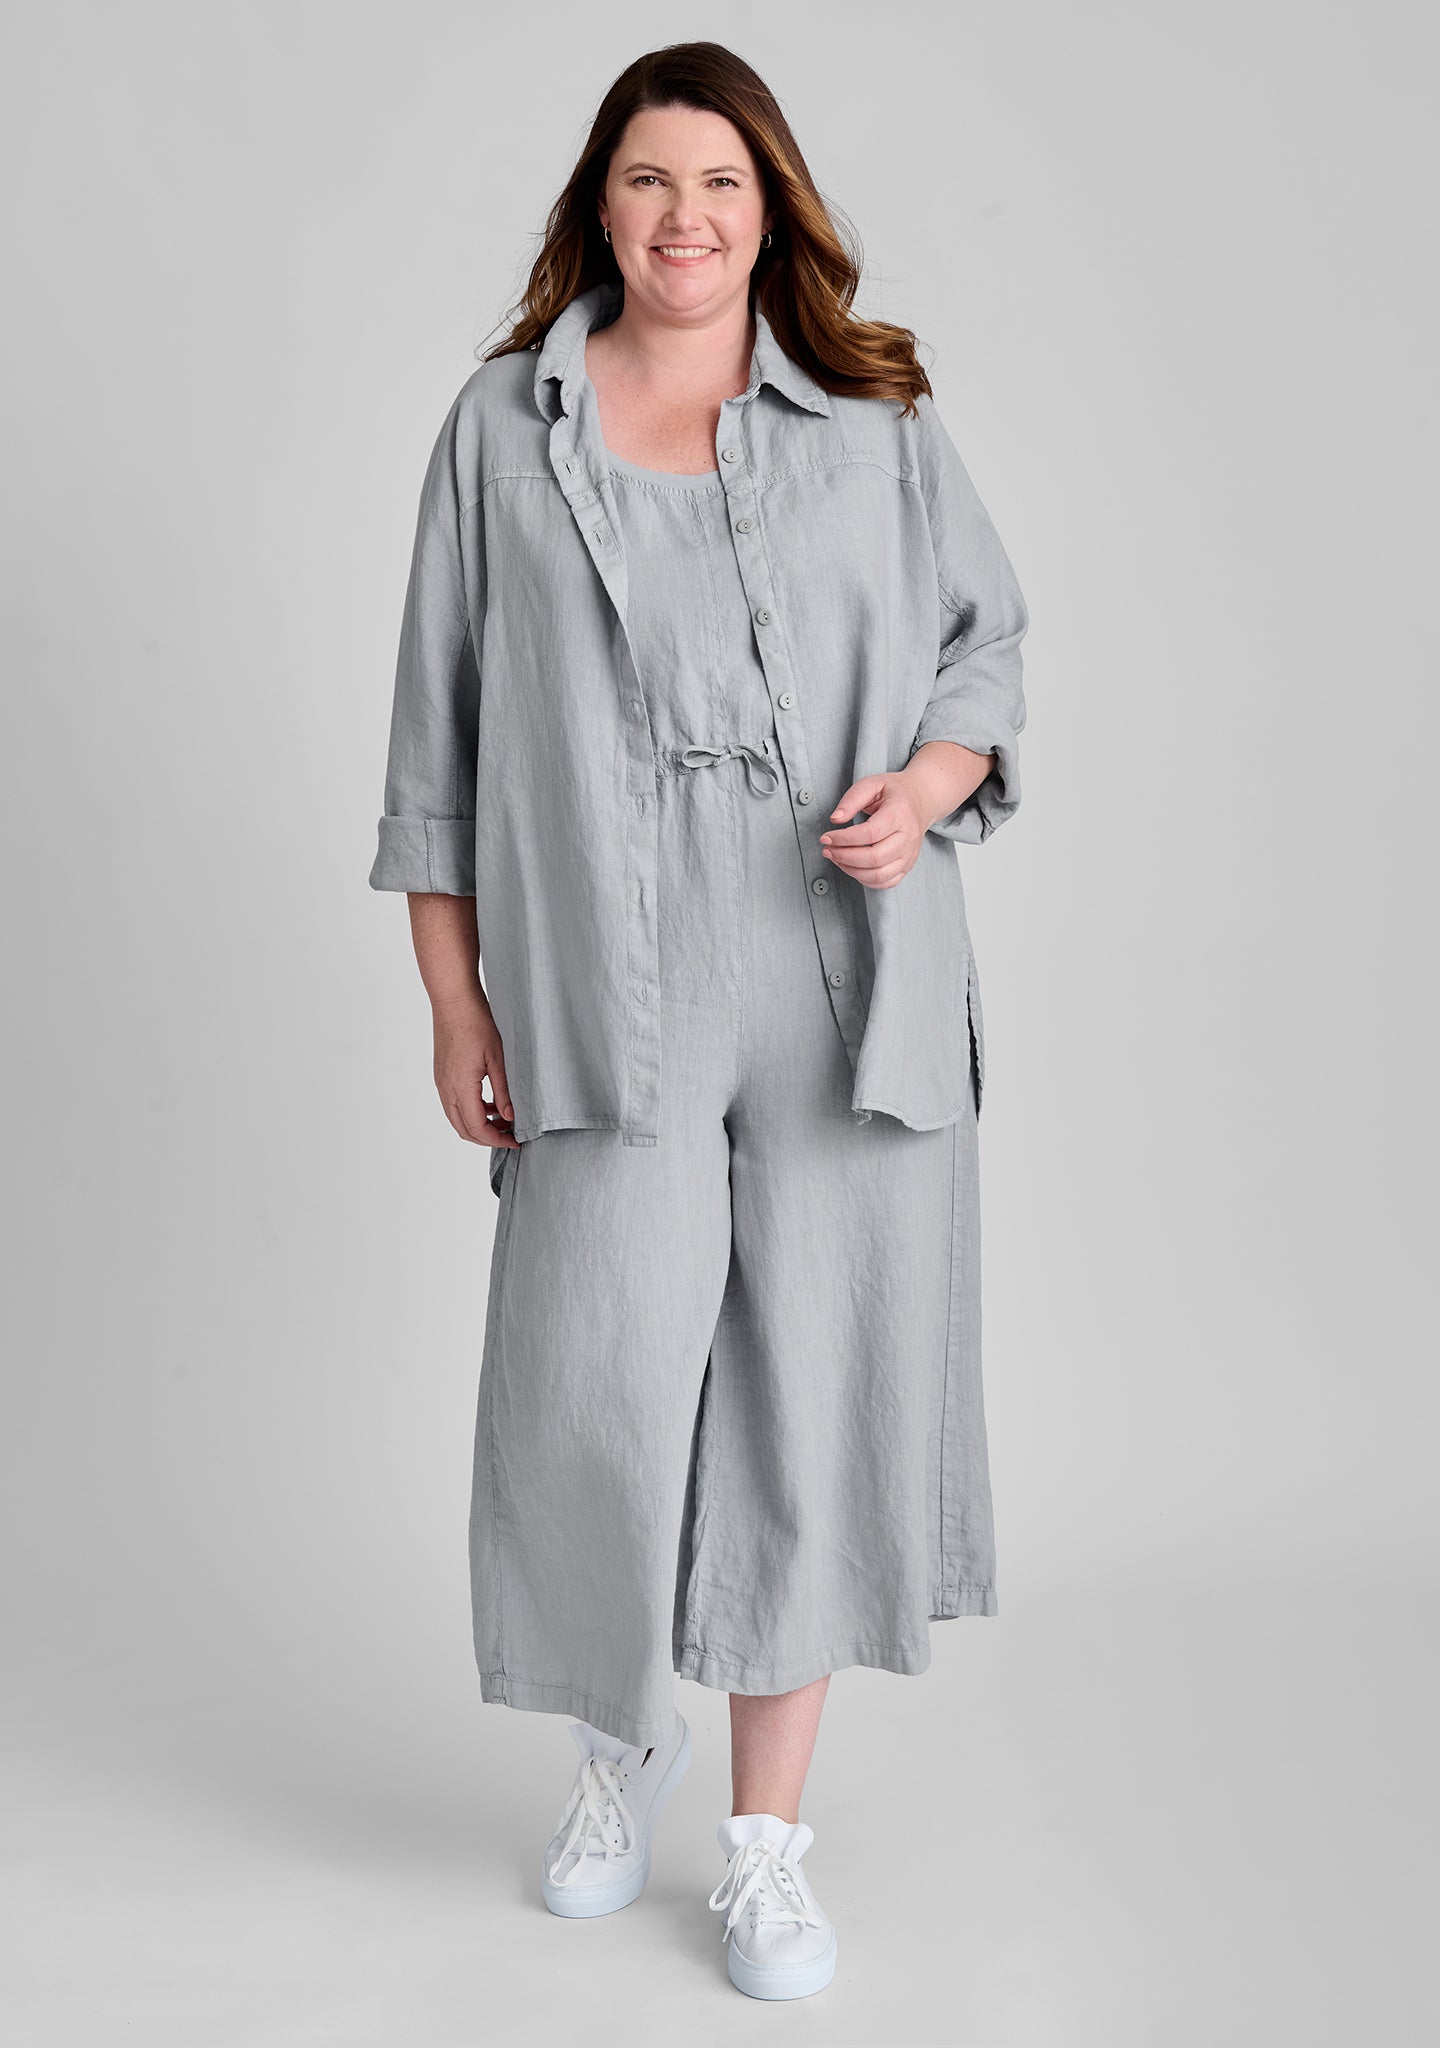 FLAX linen blouse in grey with linen jumpsuit in grey